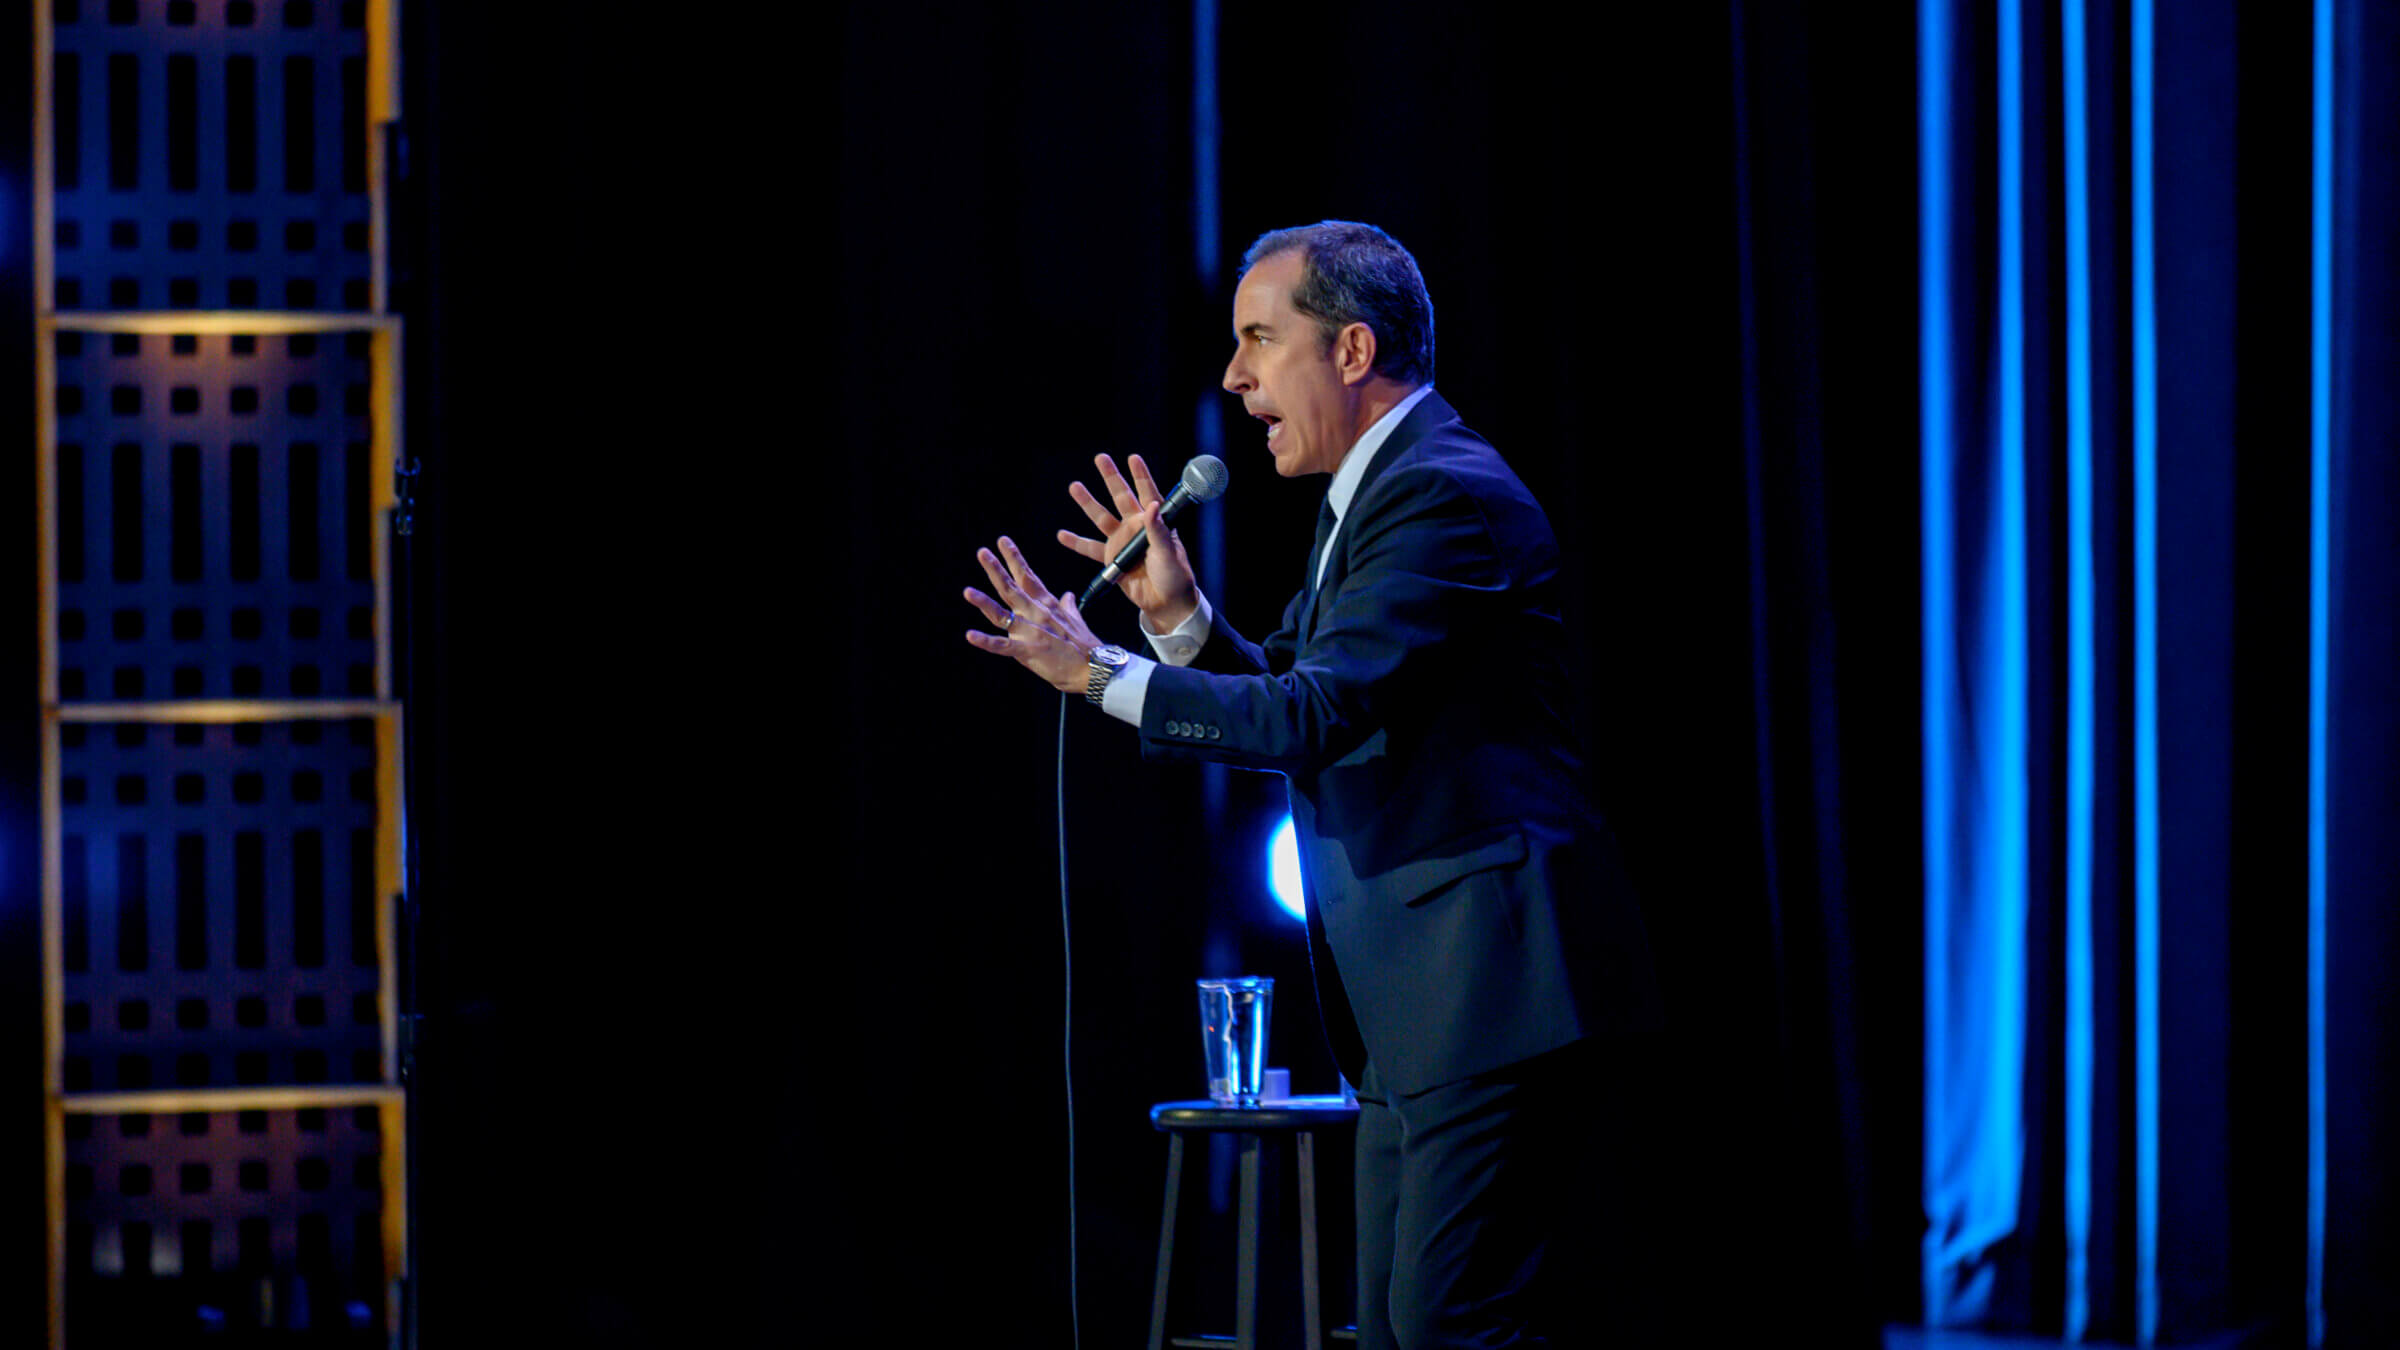 Jerry Seinfeld said that network sitcoms lost their sizzle.